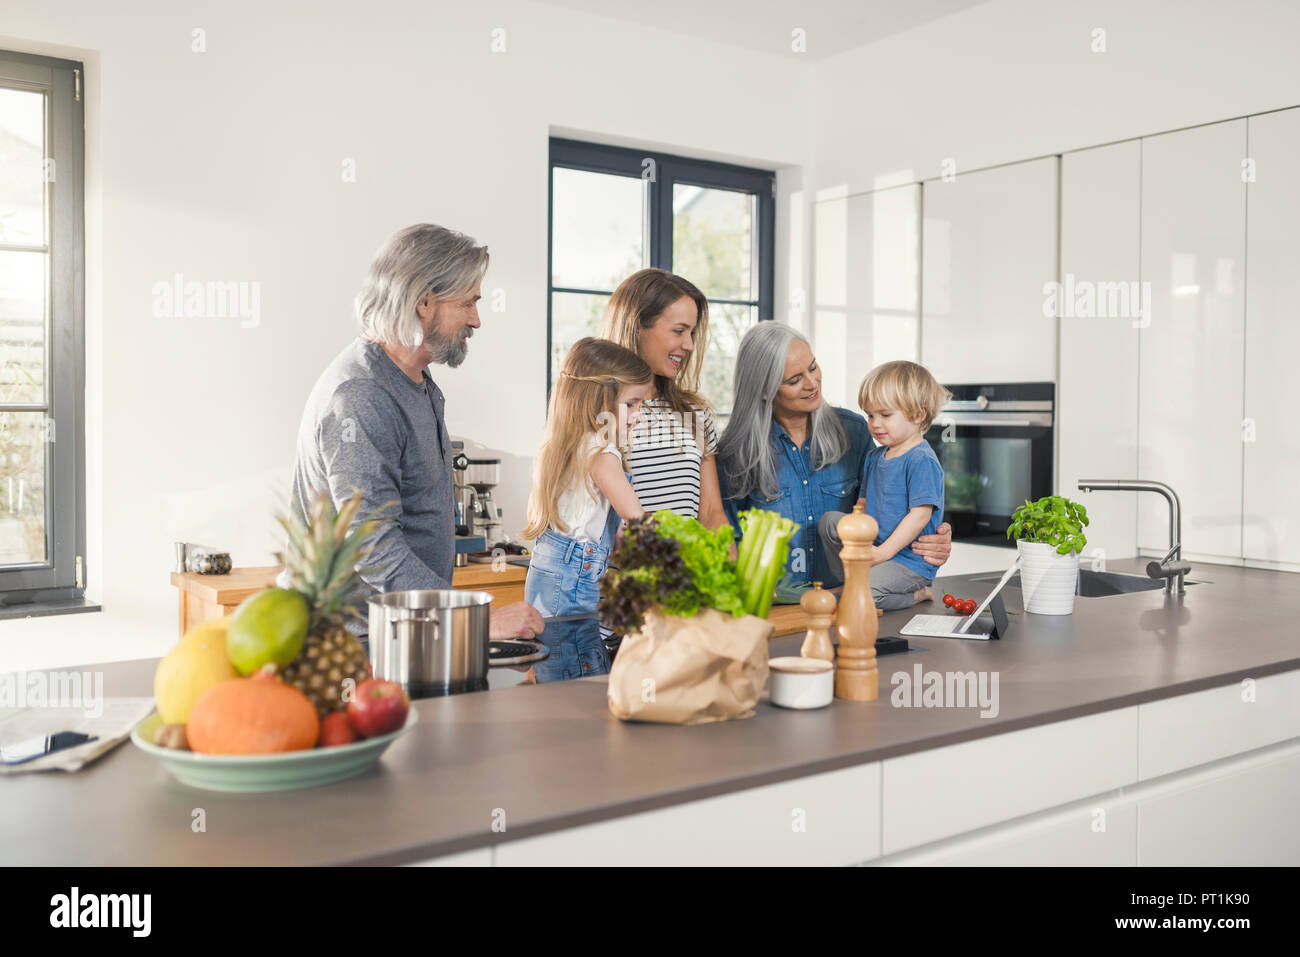 Grandparents with grandchildren and their mother standing in kitchen Stock Photo